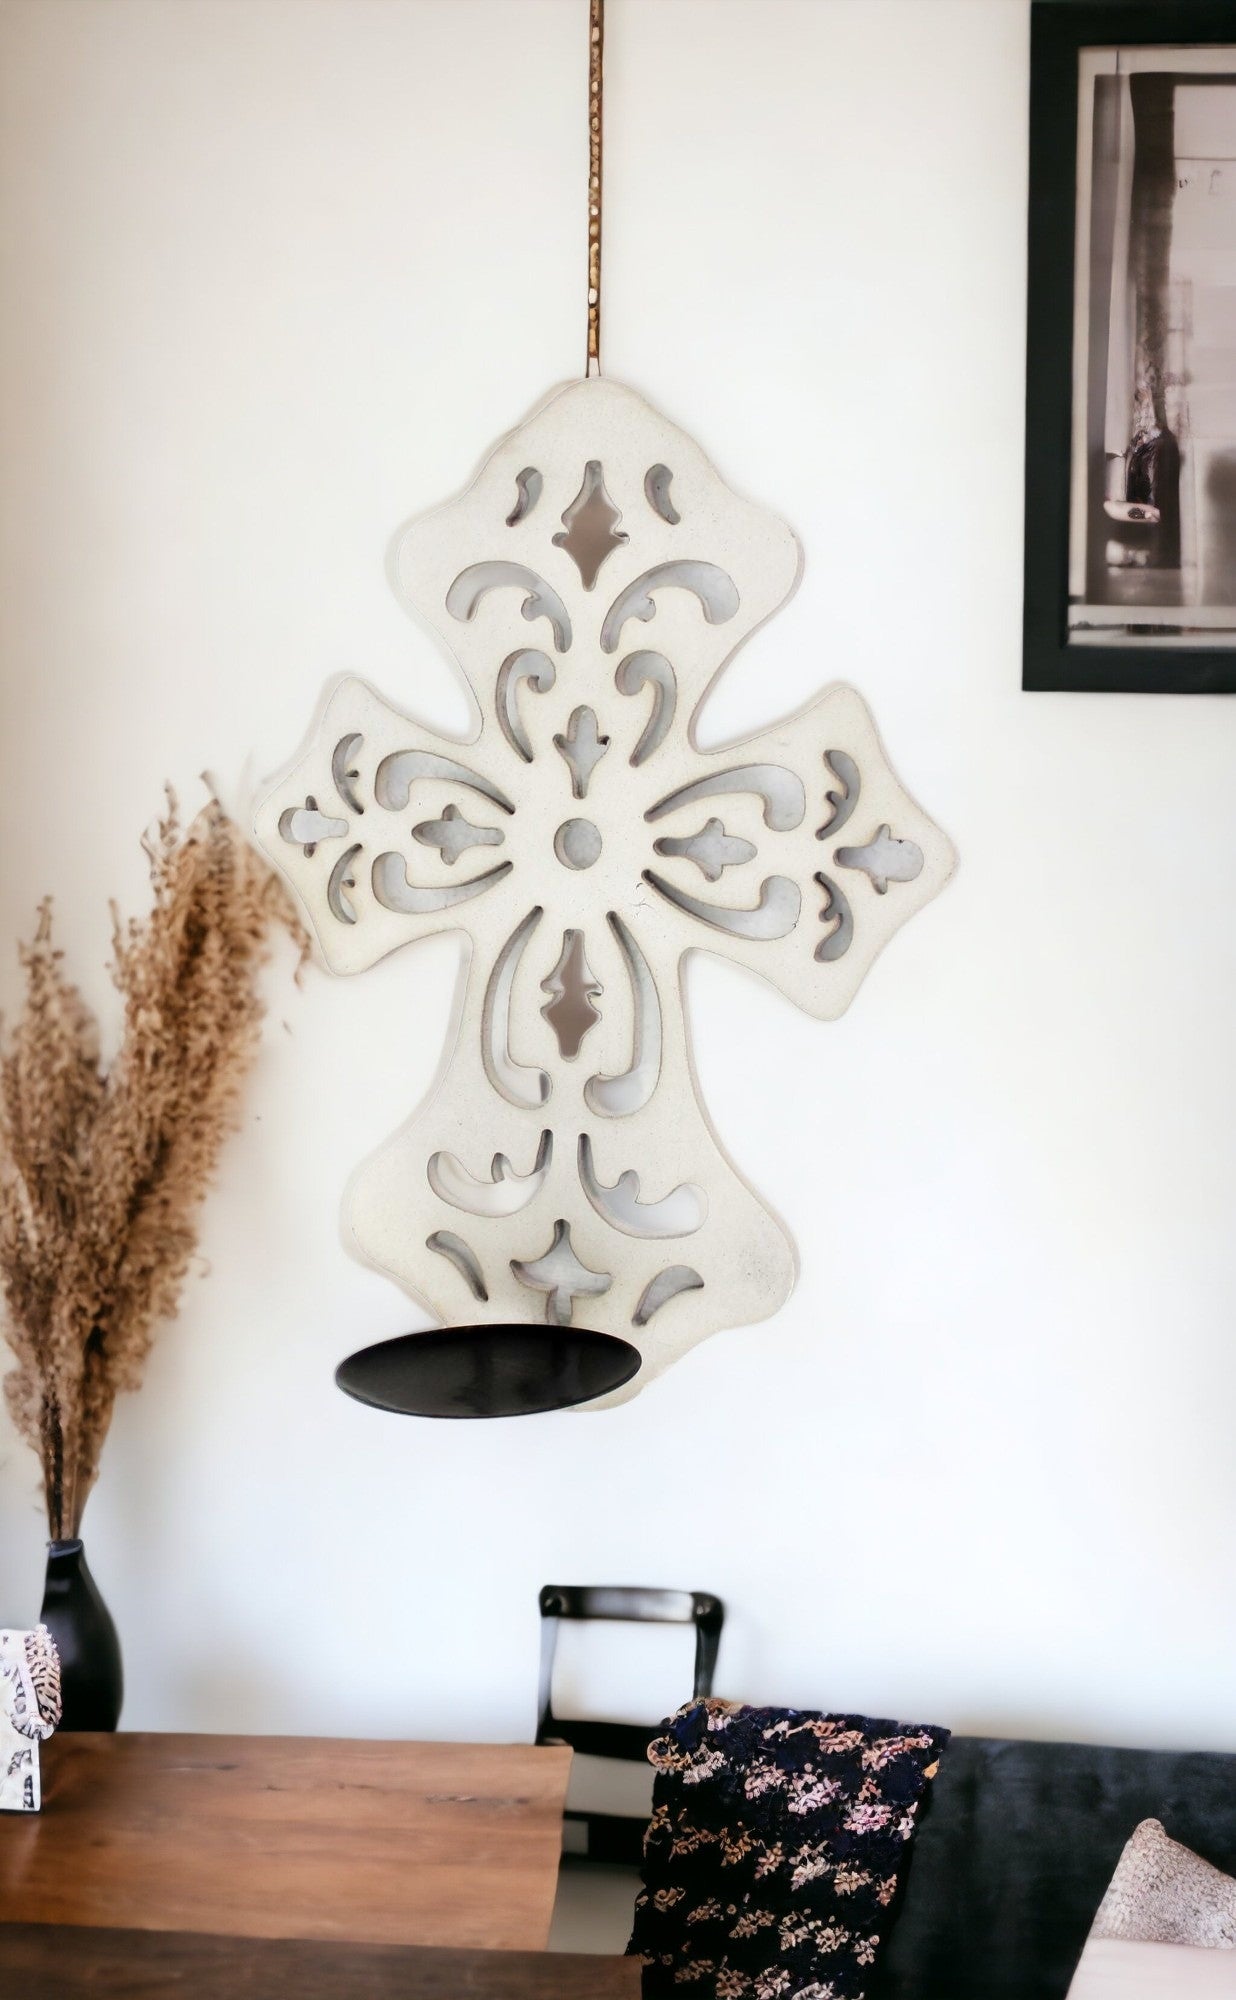 15.5 X 5 X 11 White Wooden Cross - Candle Holder Sconce